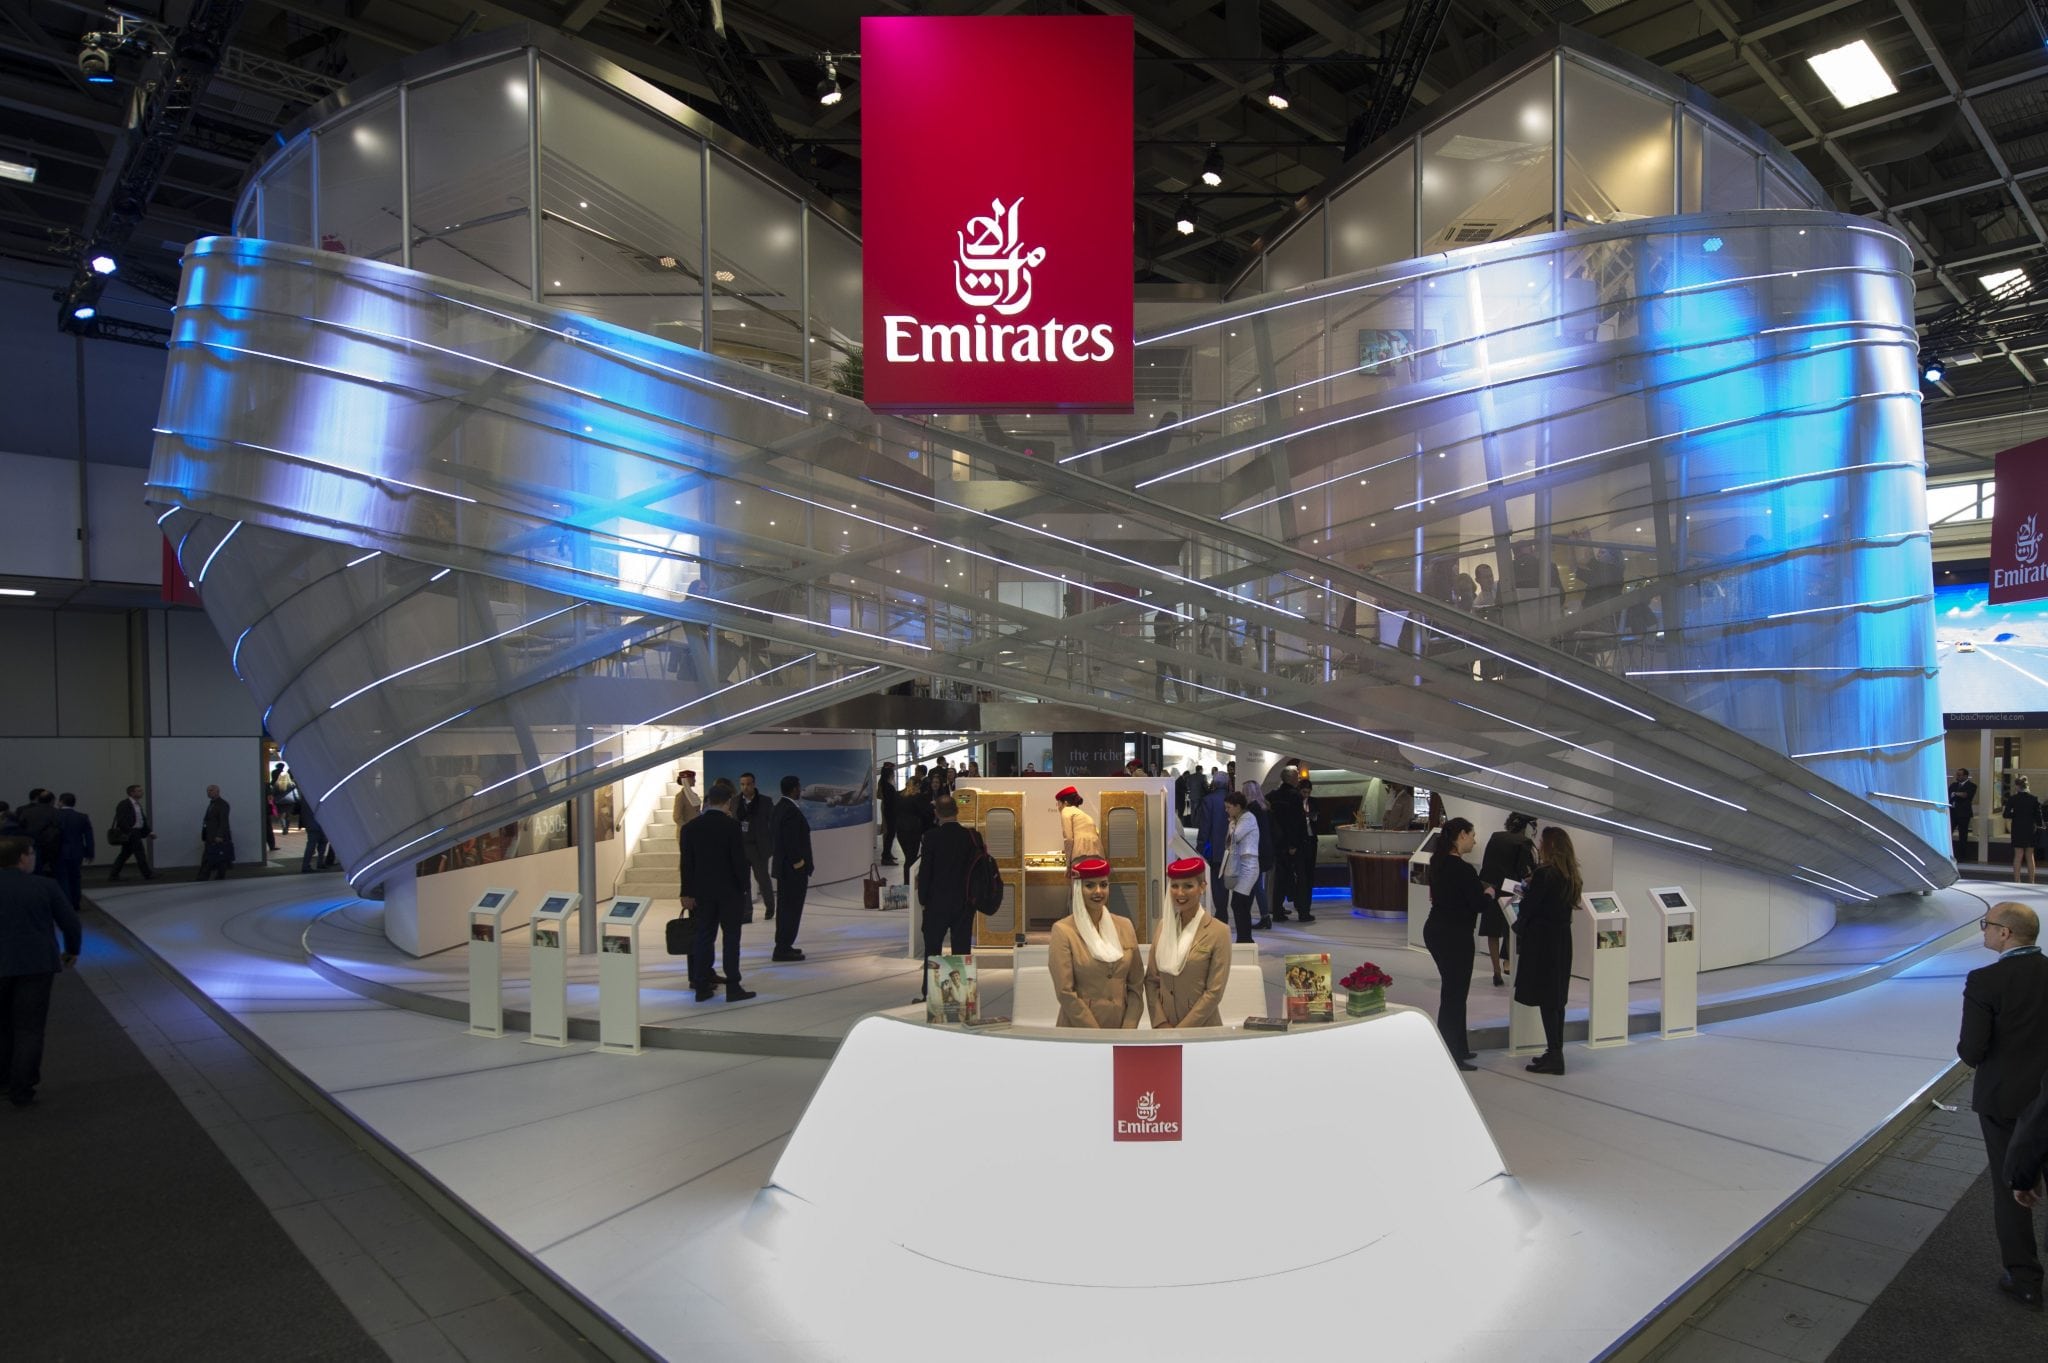 09 MAR 2013, BERLIN/GERMANY: Emirates Airline Stand at the Internationale Tourismus Boerse, ITB, Messe Berlin IMAGE: 20160309-01 KEYWORDS: Internationale Tourismus Börse